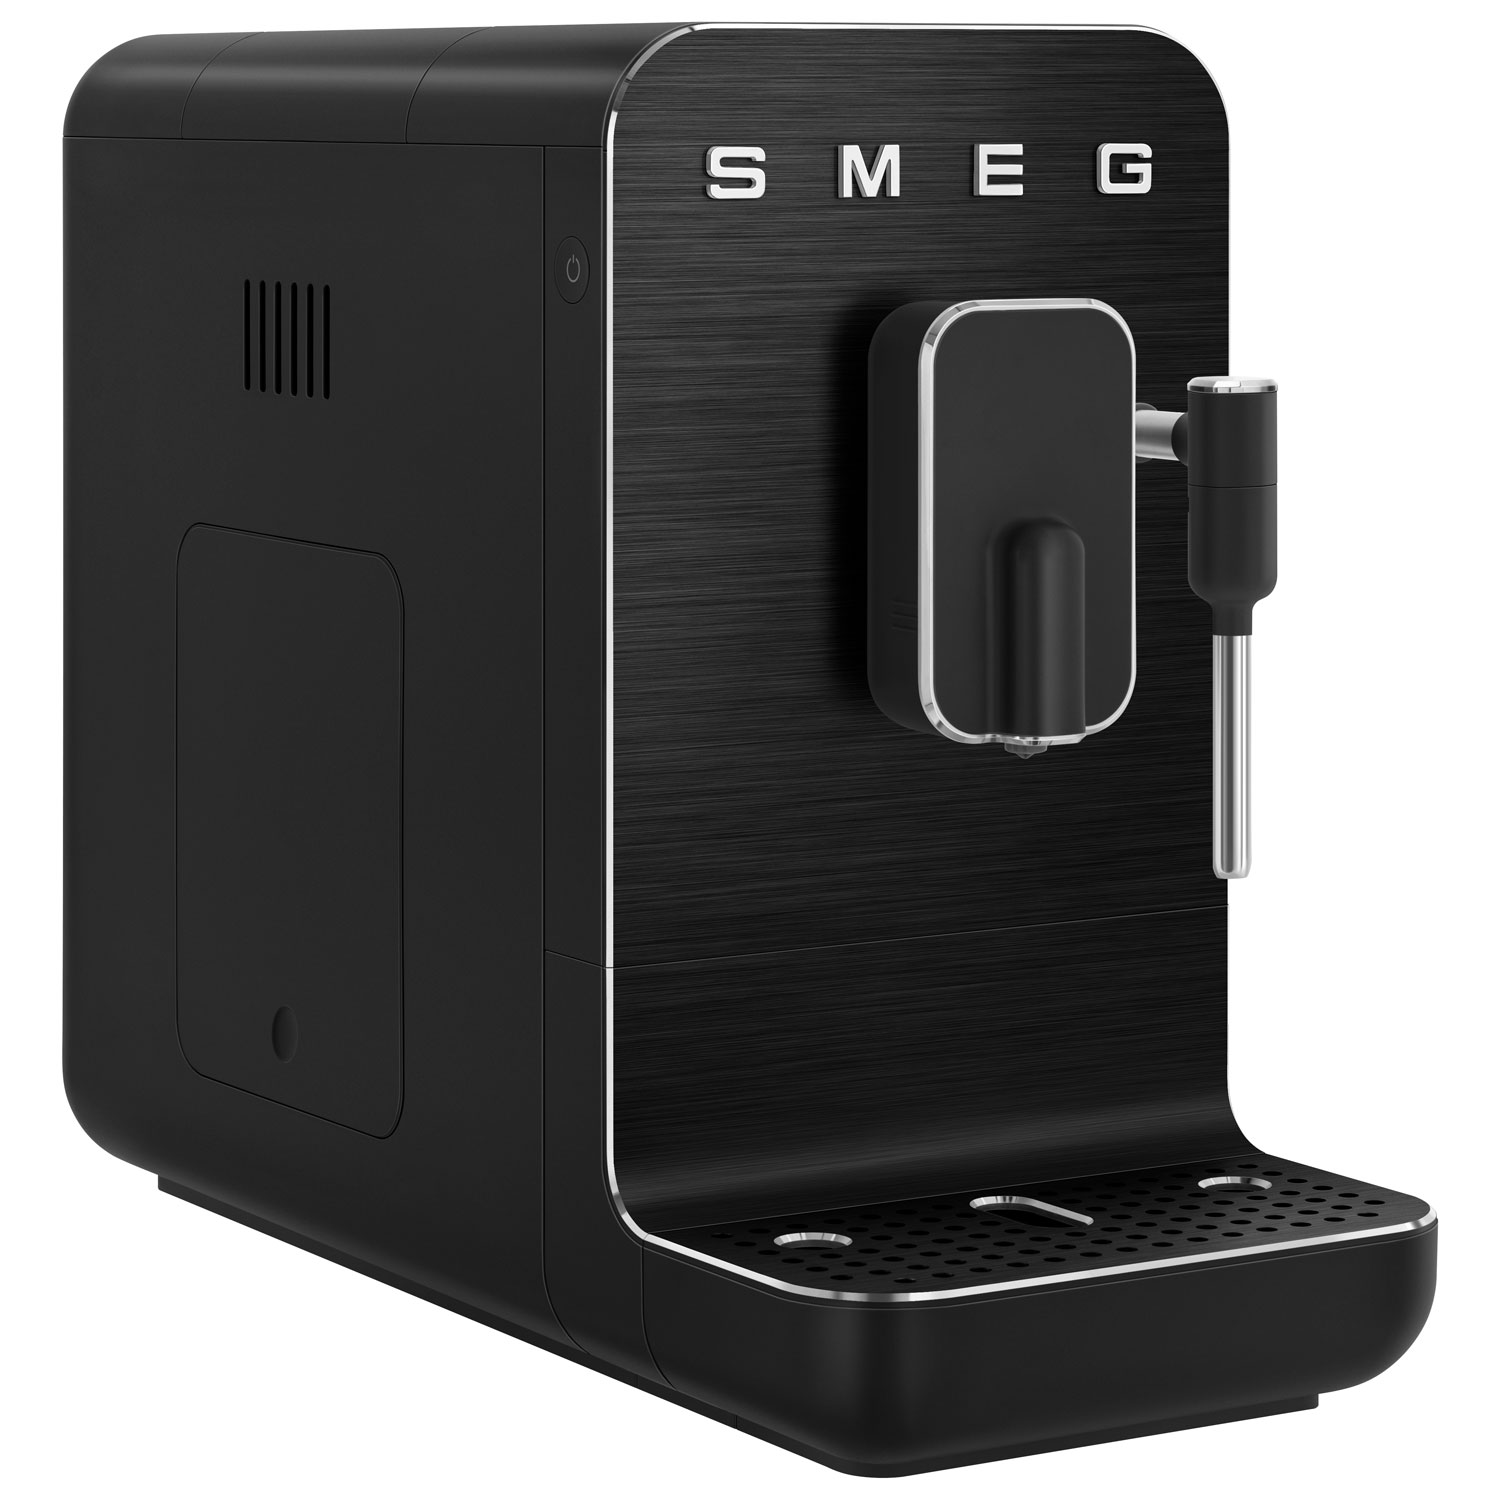 Smeg Automatic Espresso Machine with Frother and Coffee Grinder - Black